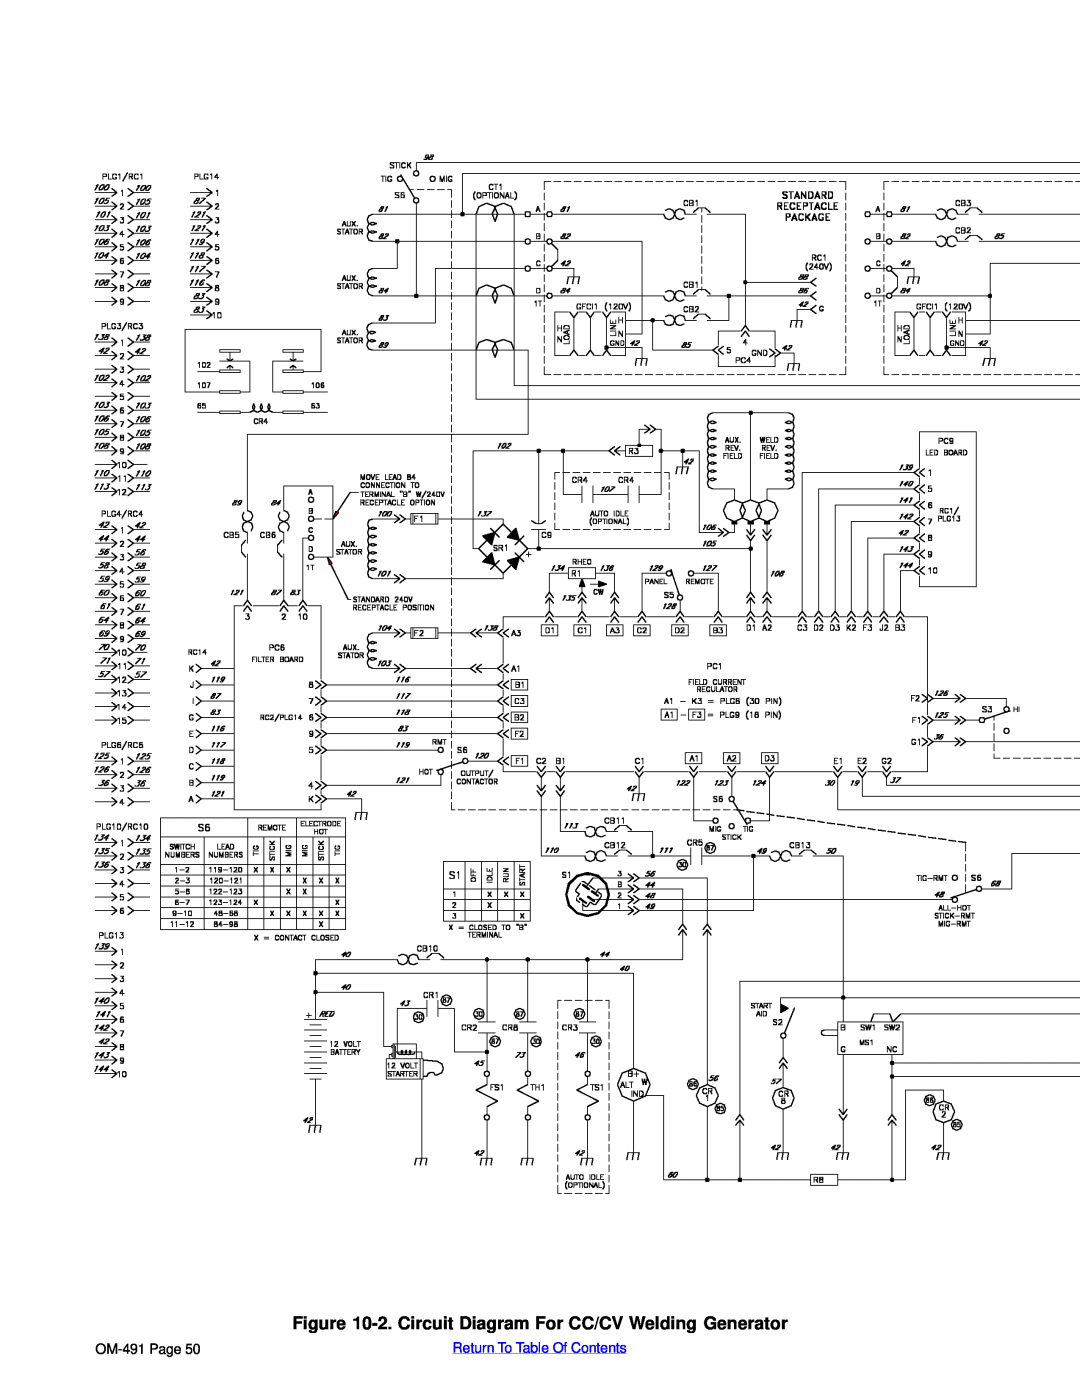 Miller Electric Big Blue 402P 2. Circuit Diagram For CC/CV Welding Generator, OM-491 Page, Return To Table Of Contents 